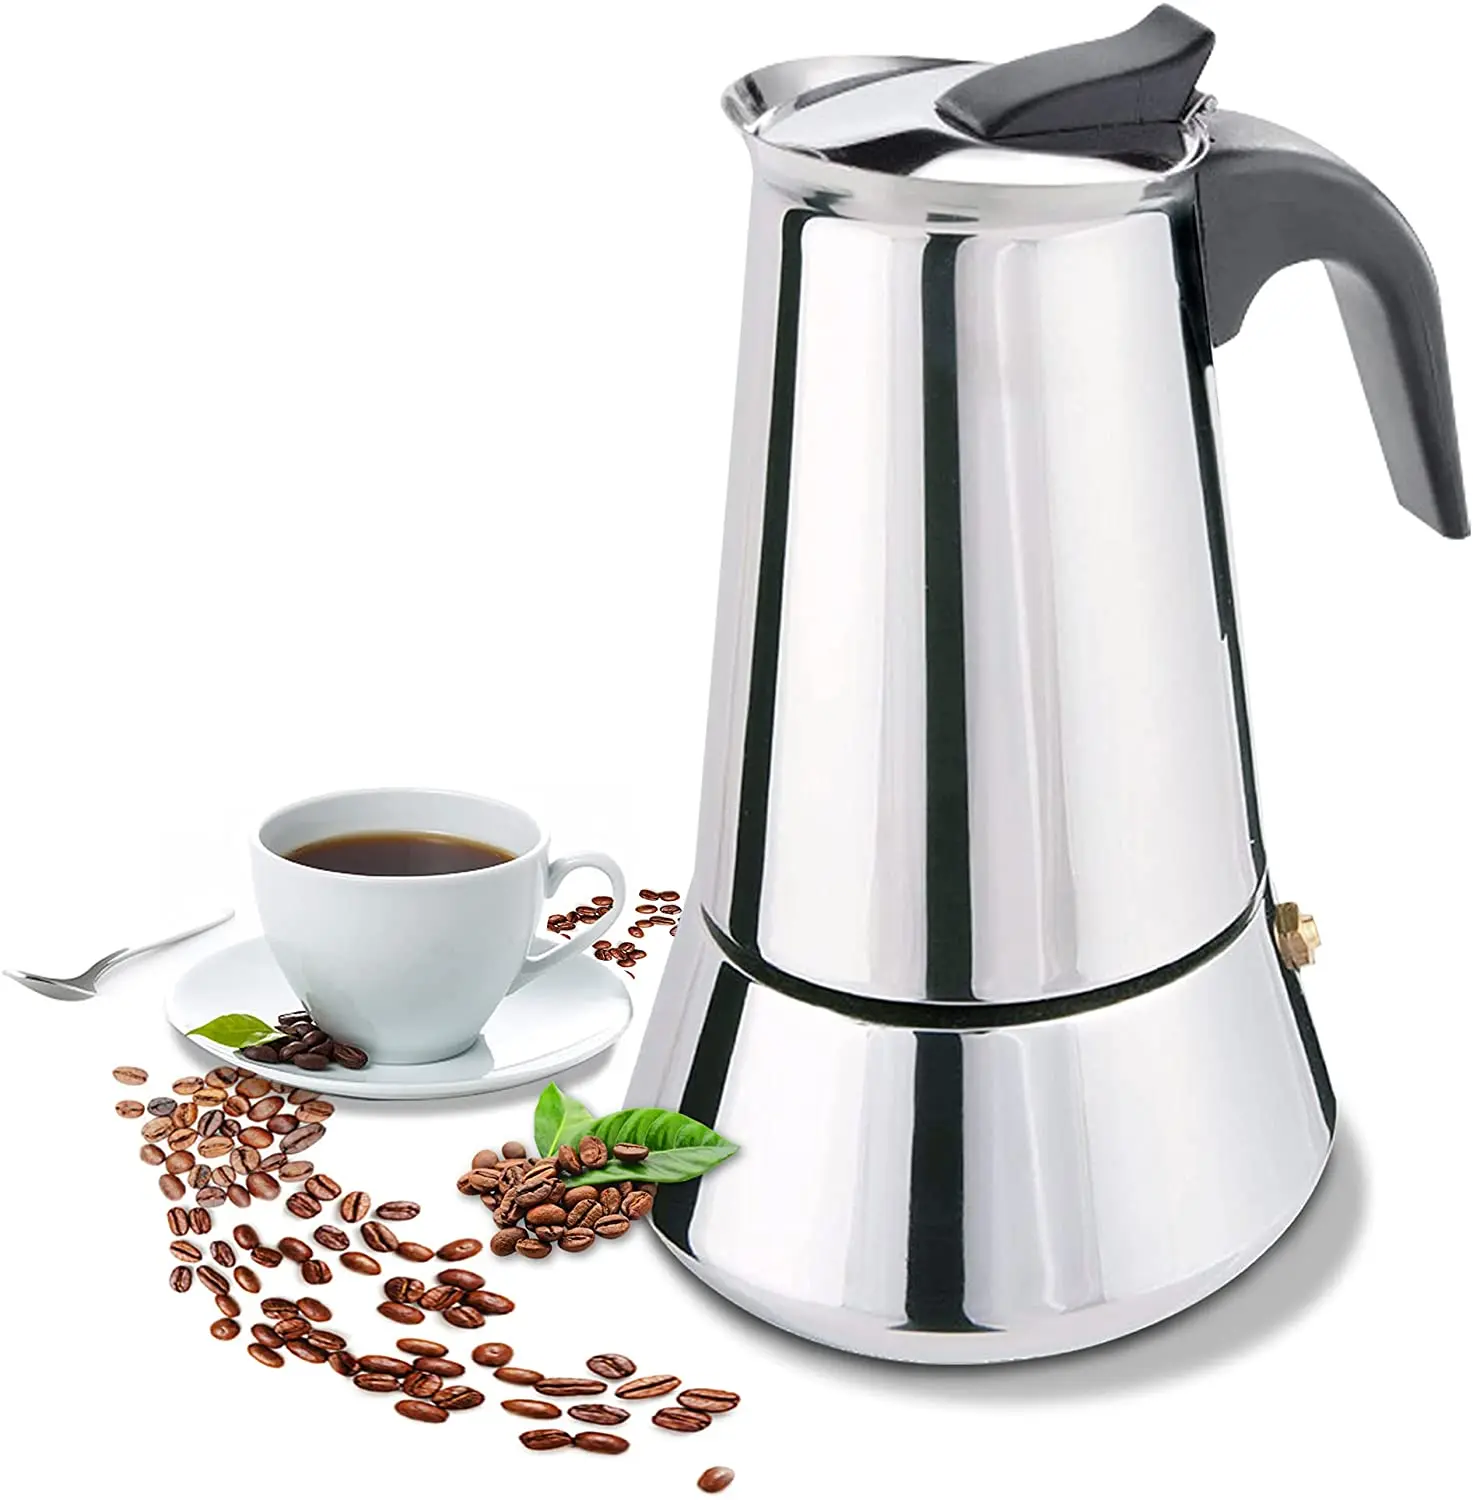 Stainless Steel Coffee Pot Italian Moka Pot Espresso Coffee Maker Cafe Percolator Maker Coffee Tools For Induction Stovetop